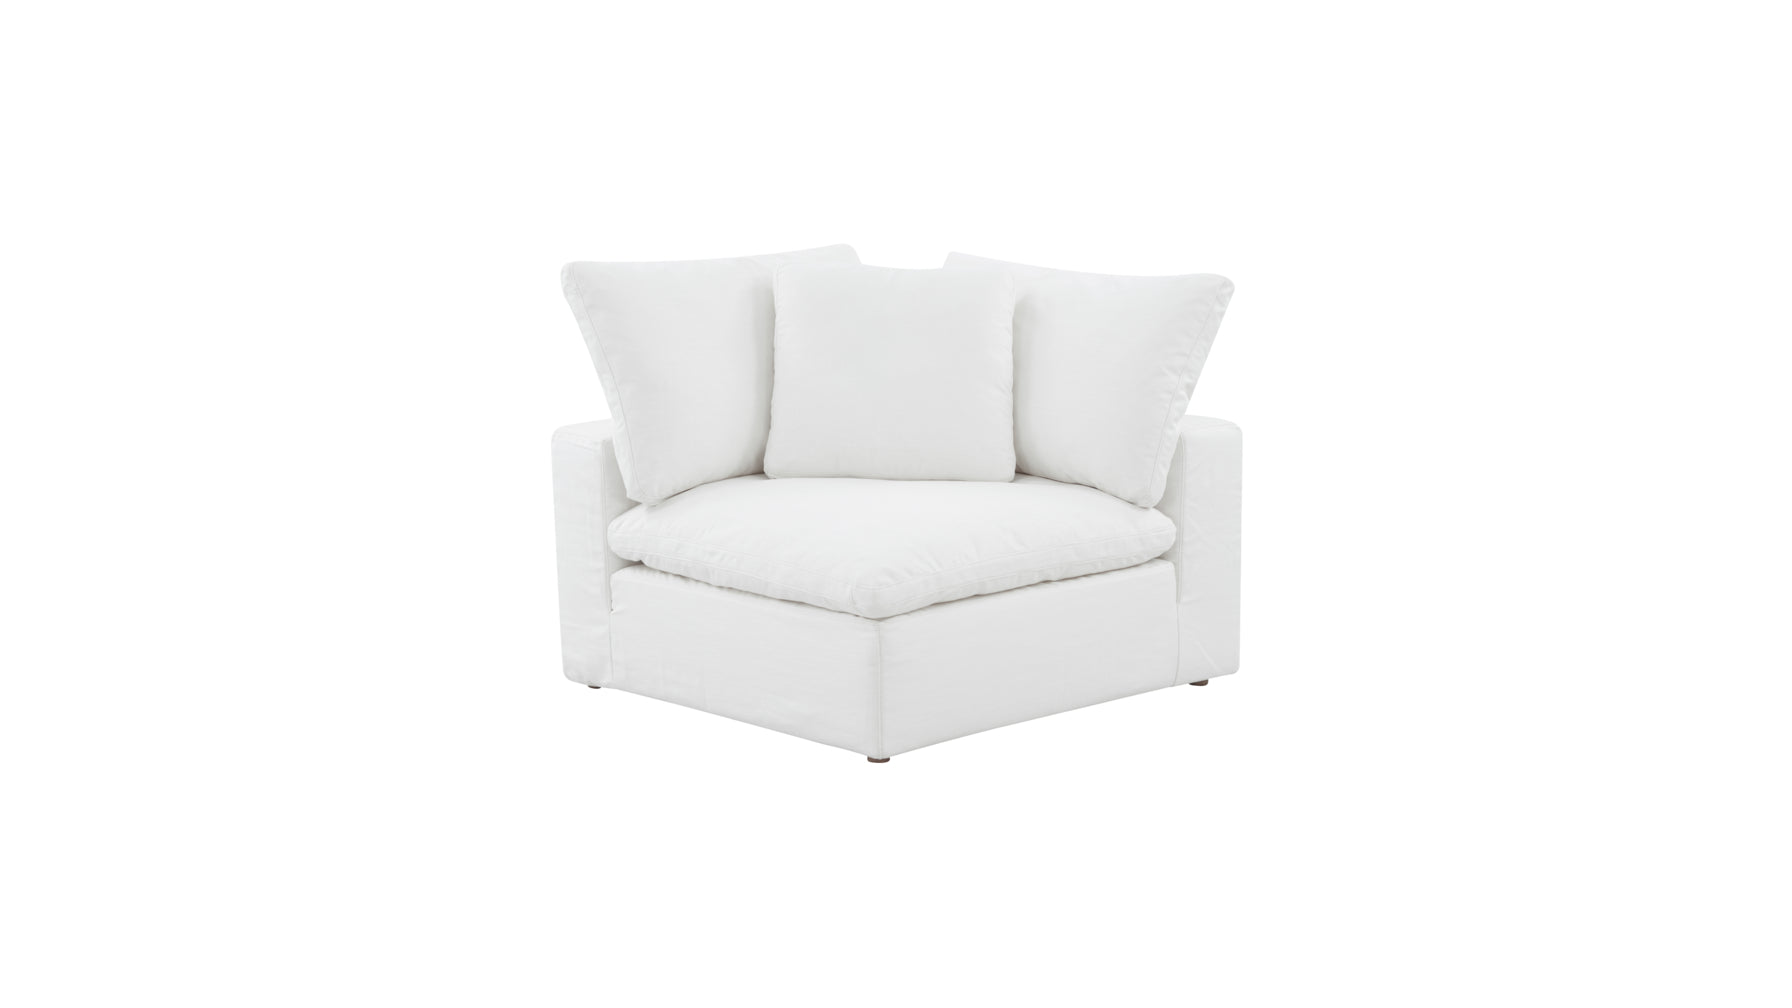 Movie Night™ Corner Chair, Large, Brie (Left or Right) - Image 4